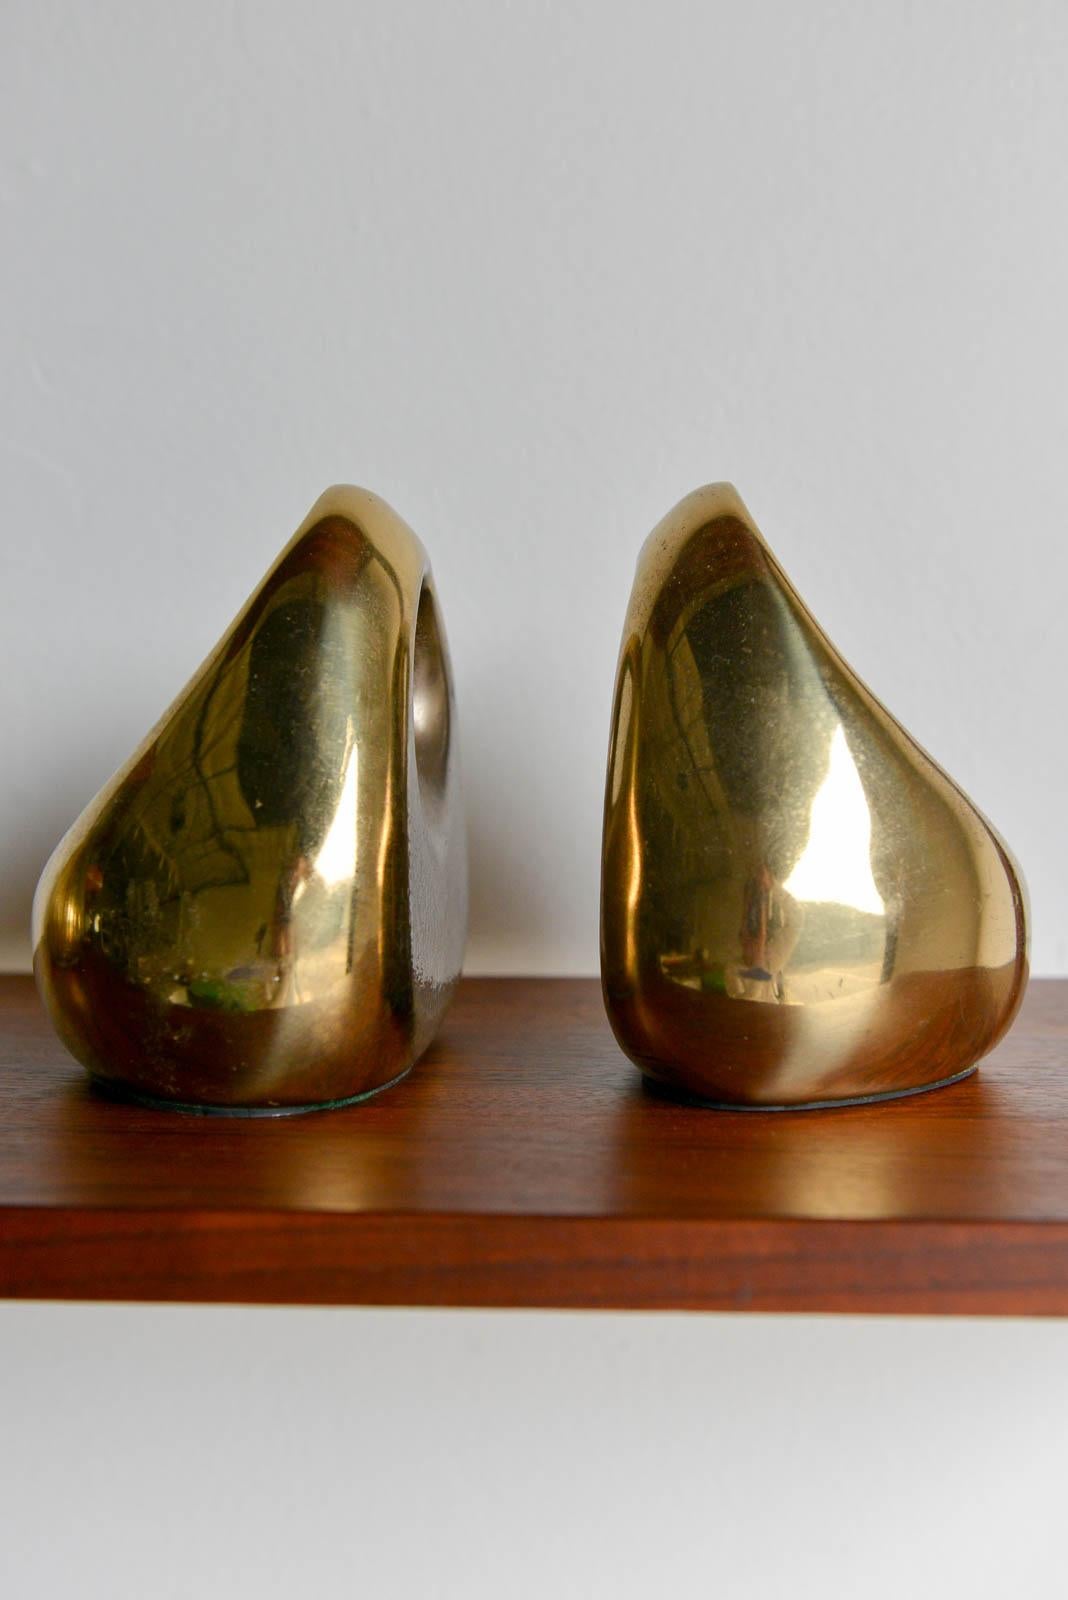 Brass bookends by Ben Seibel for Jenfred Ware, ca. 1960. Brass finish is vintage with some patina. Bottoms are felt lined to protect shelving.

Measures 
Height: 6 in. (15.24 cm)
Width: 5.5 in. (13.97 cm)
Depth: 4.25 in. (10.8 cm).